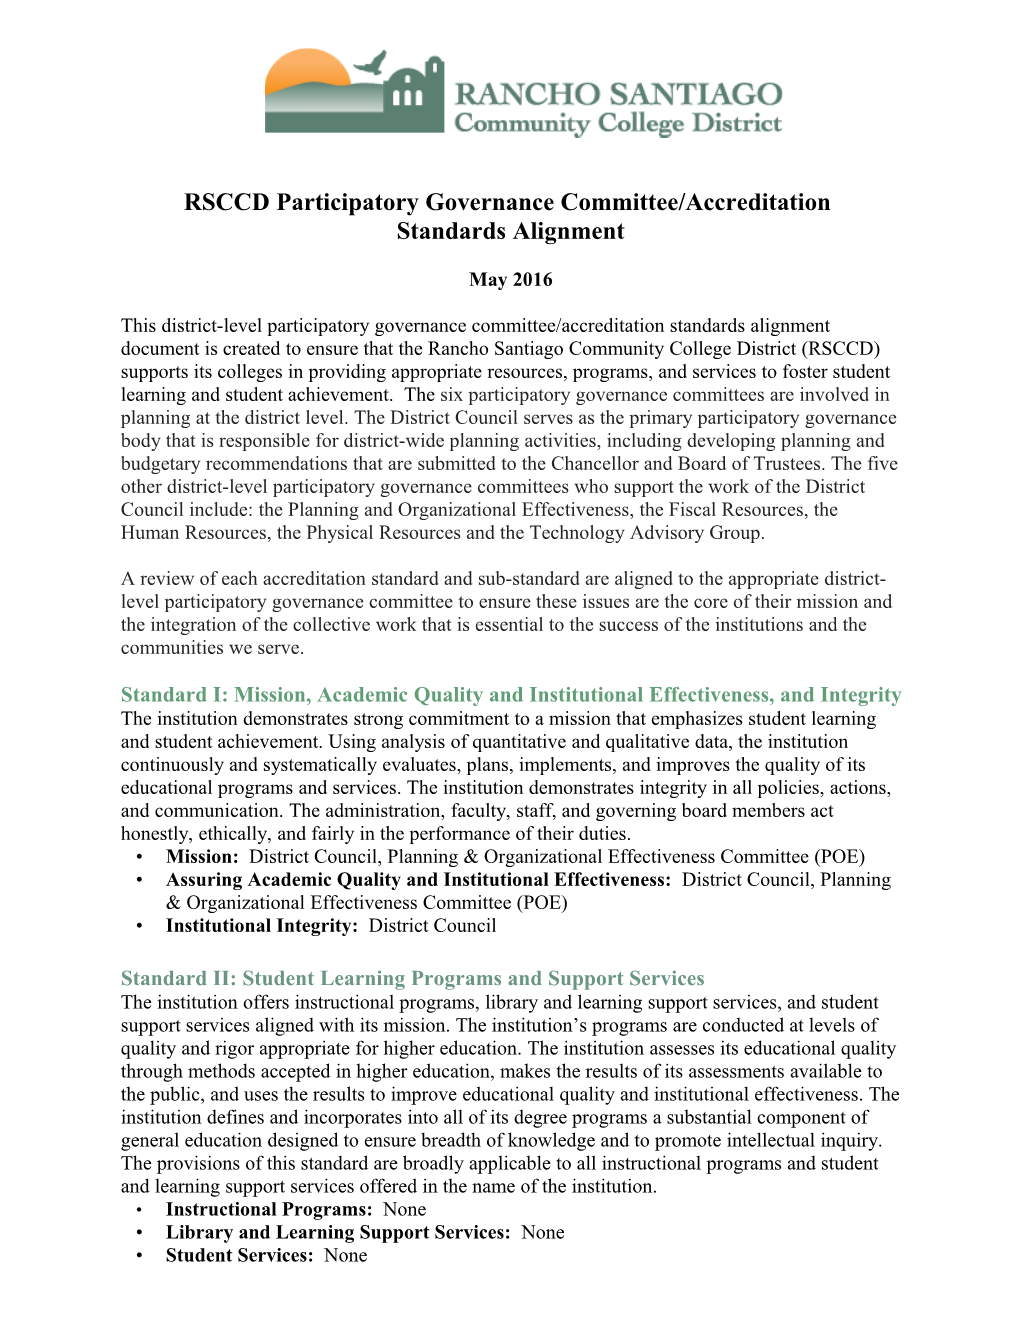 RSCCD Participatory Governance Committee/Accreditation